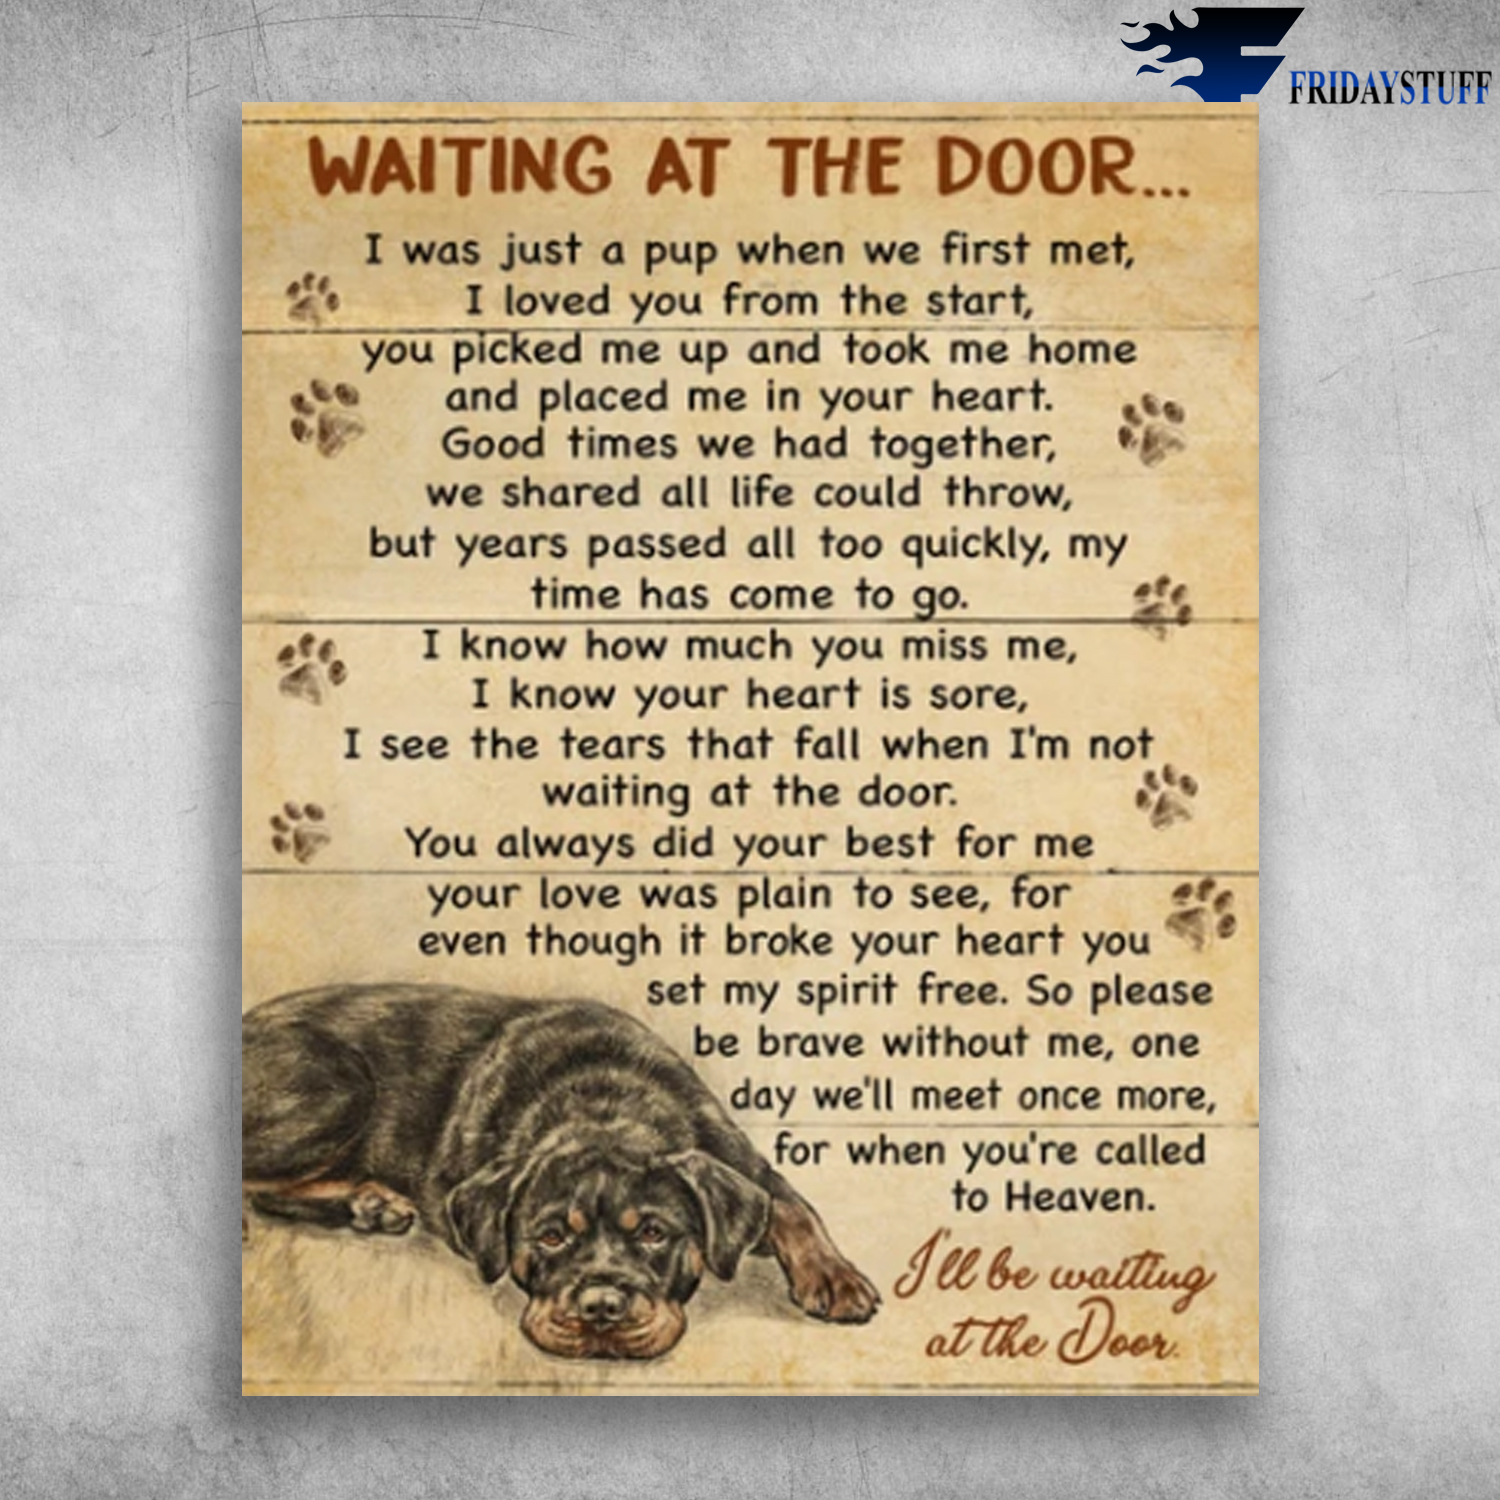 Cane Corso Dog Waiting At The Door I Loved You From The Start